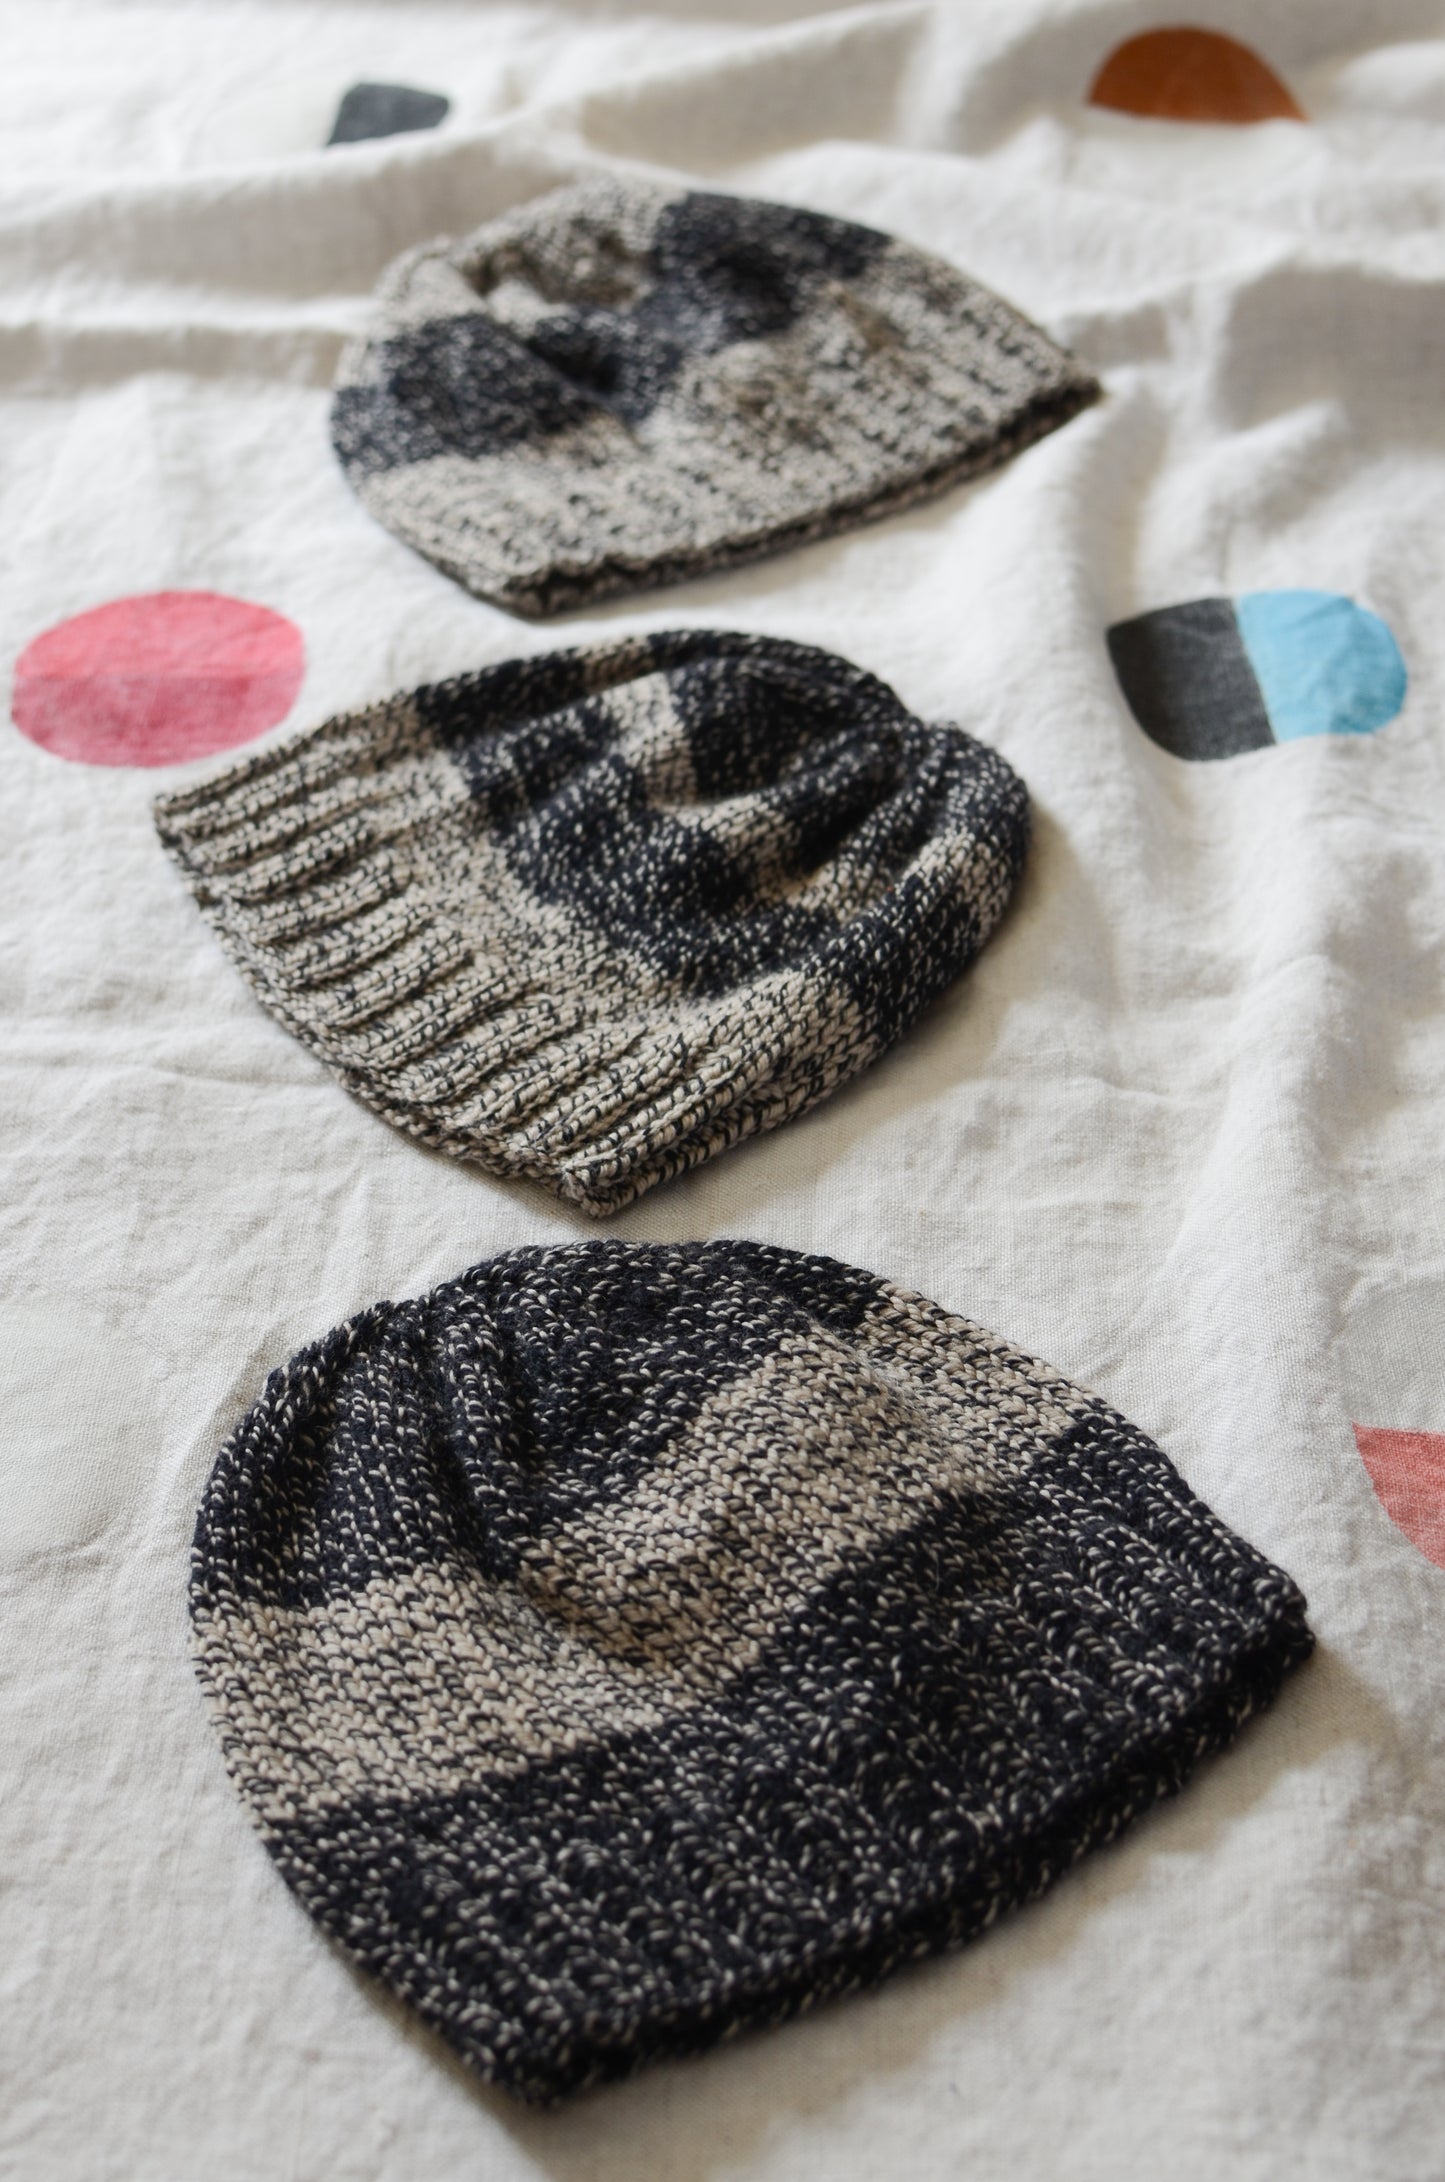 Partial Eclipse Hat - Free Knitting Pattern Digital Download